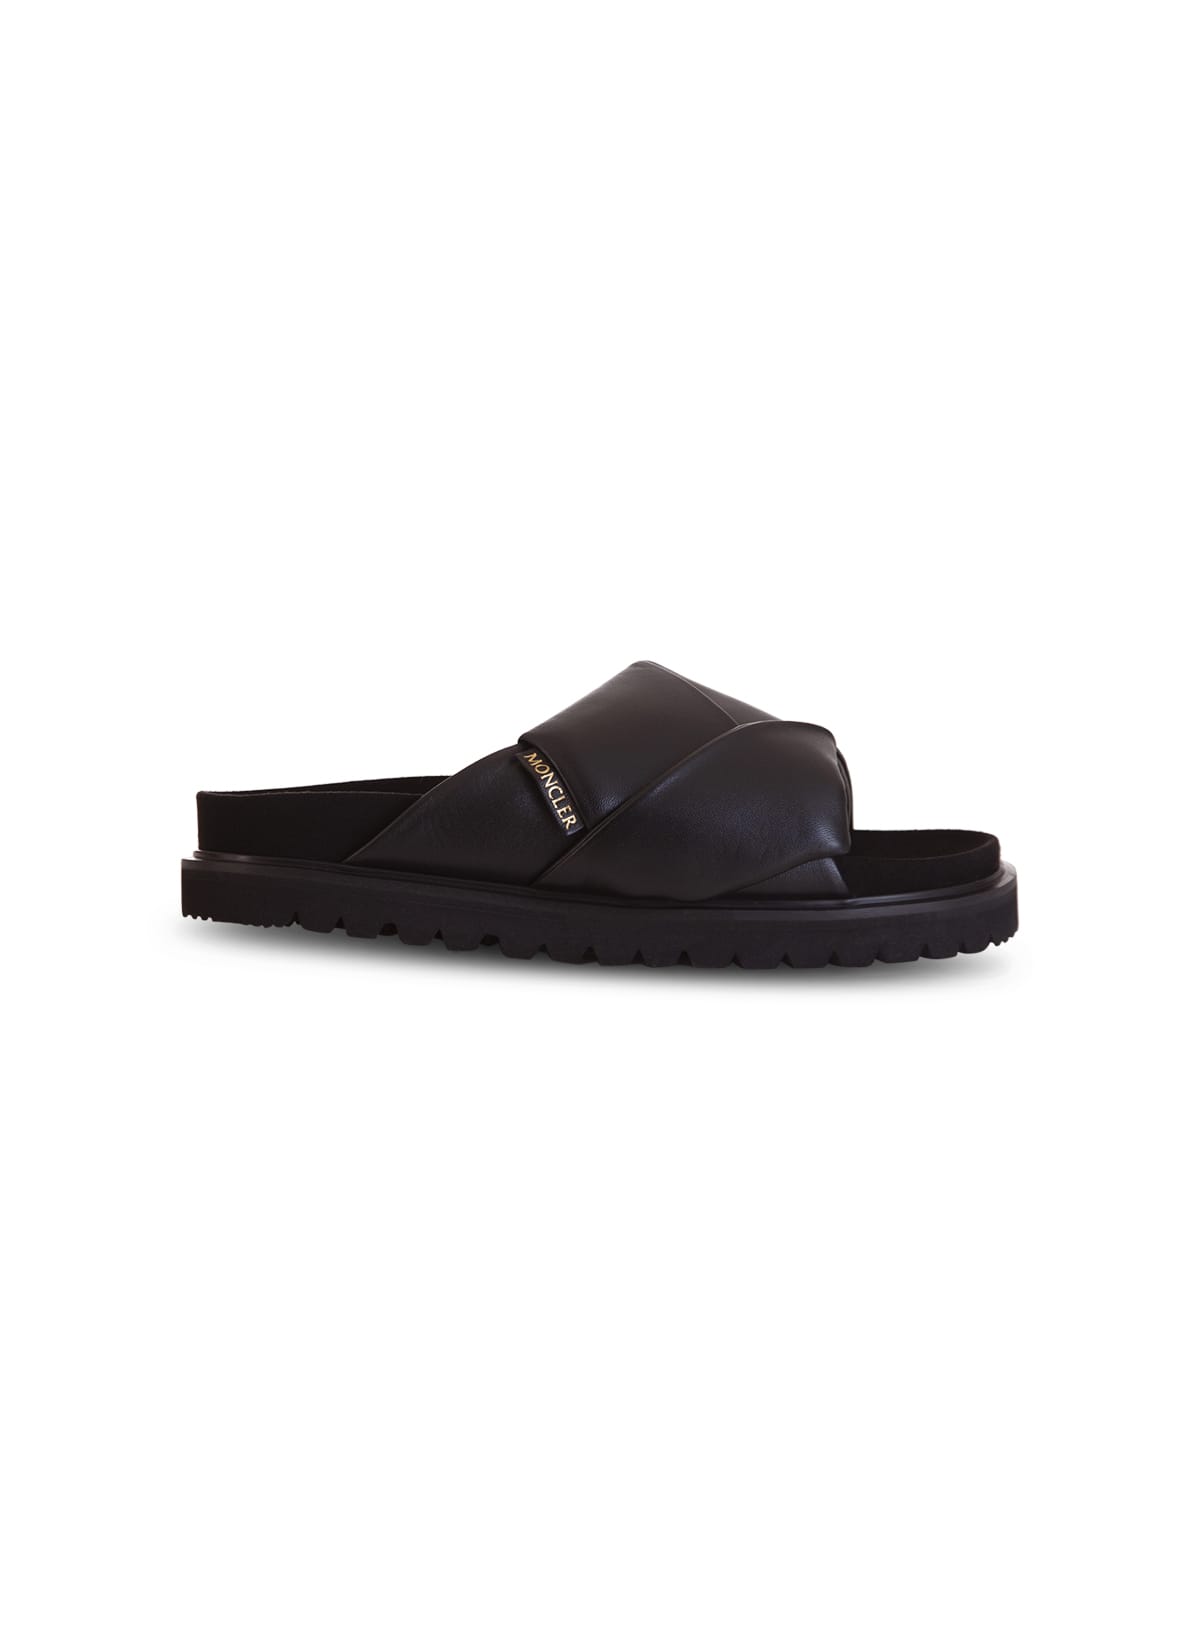 Buy Moncler Crossover Strap Leather Slides online, shop Moncler shoes with free shipping